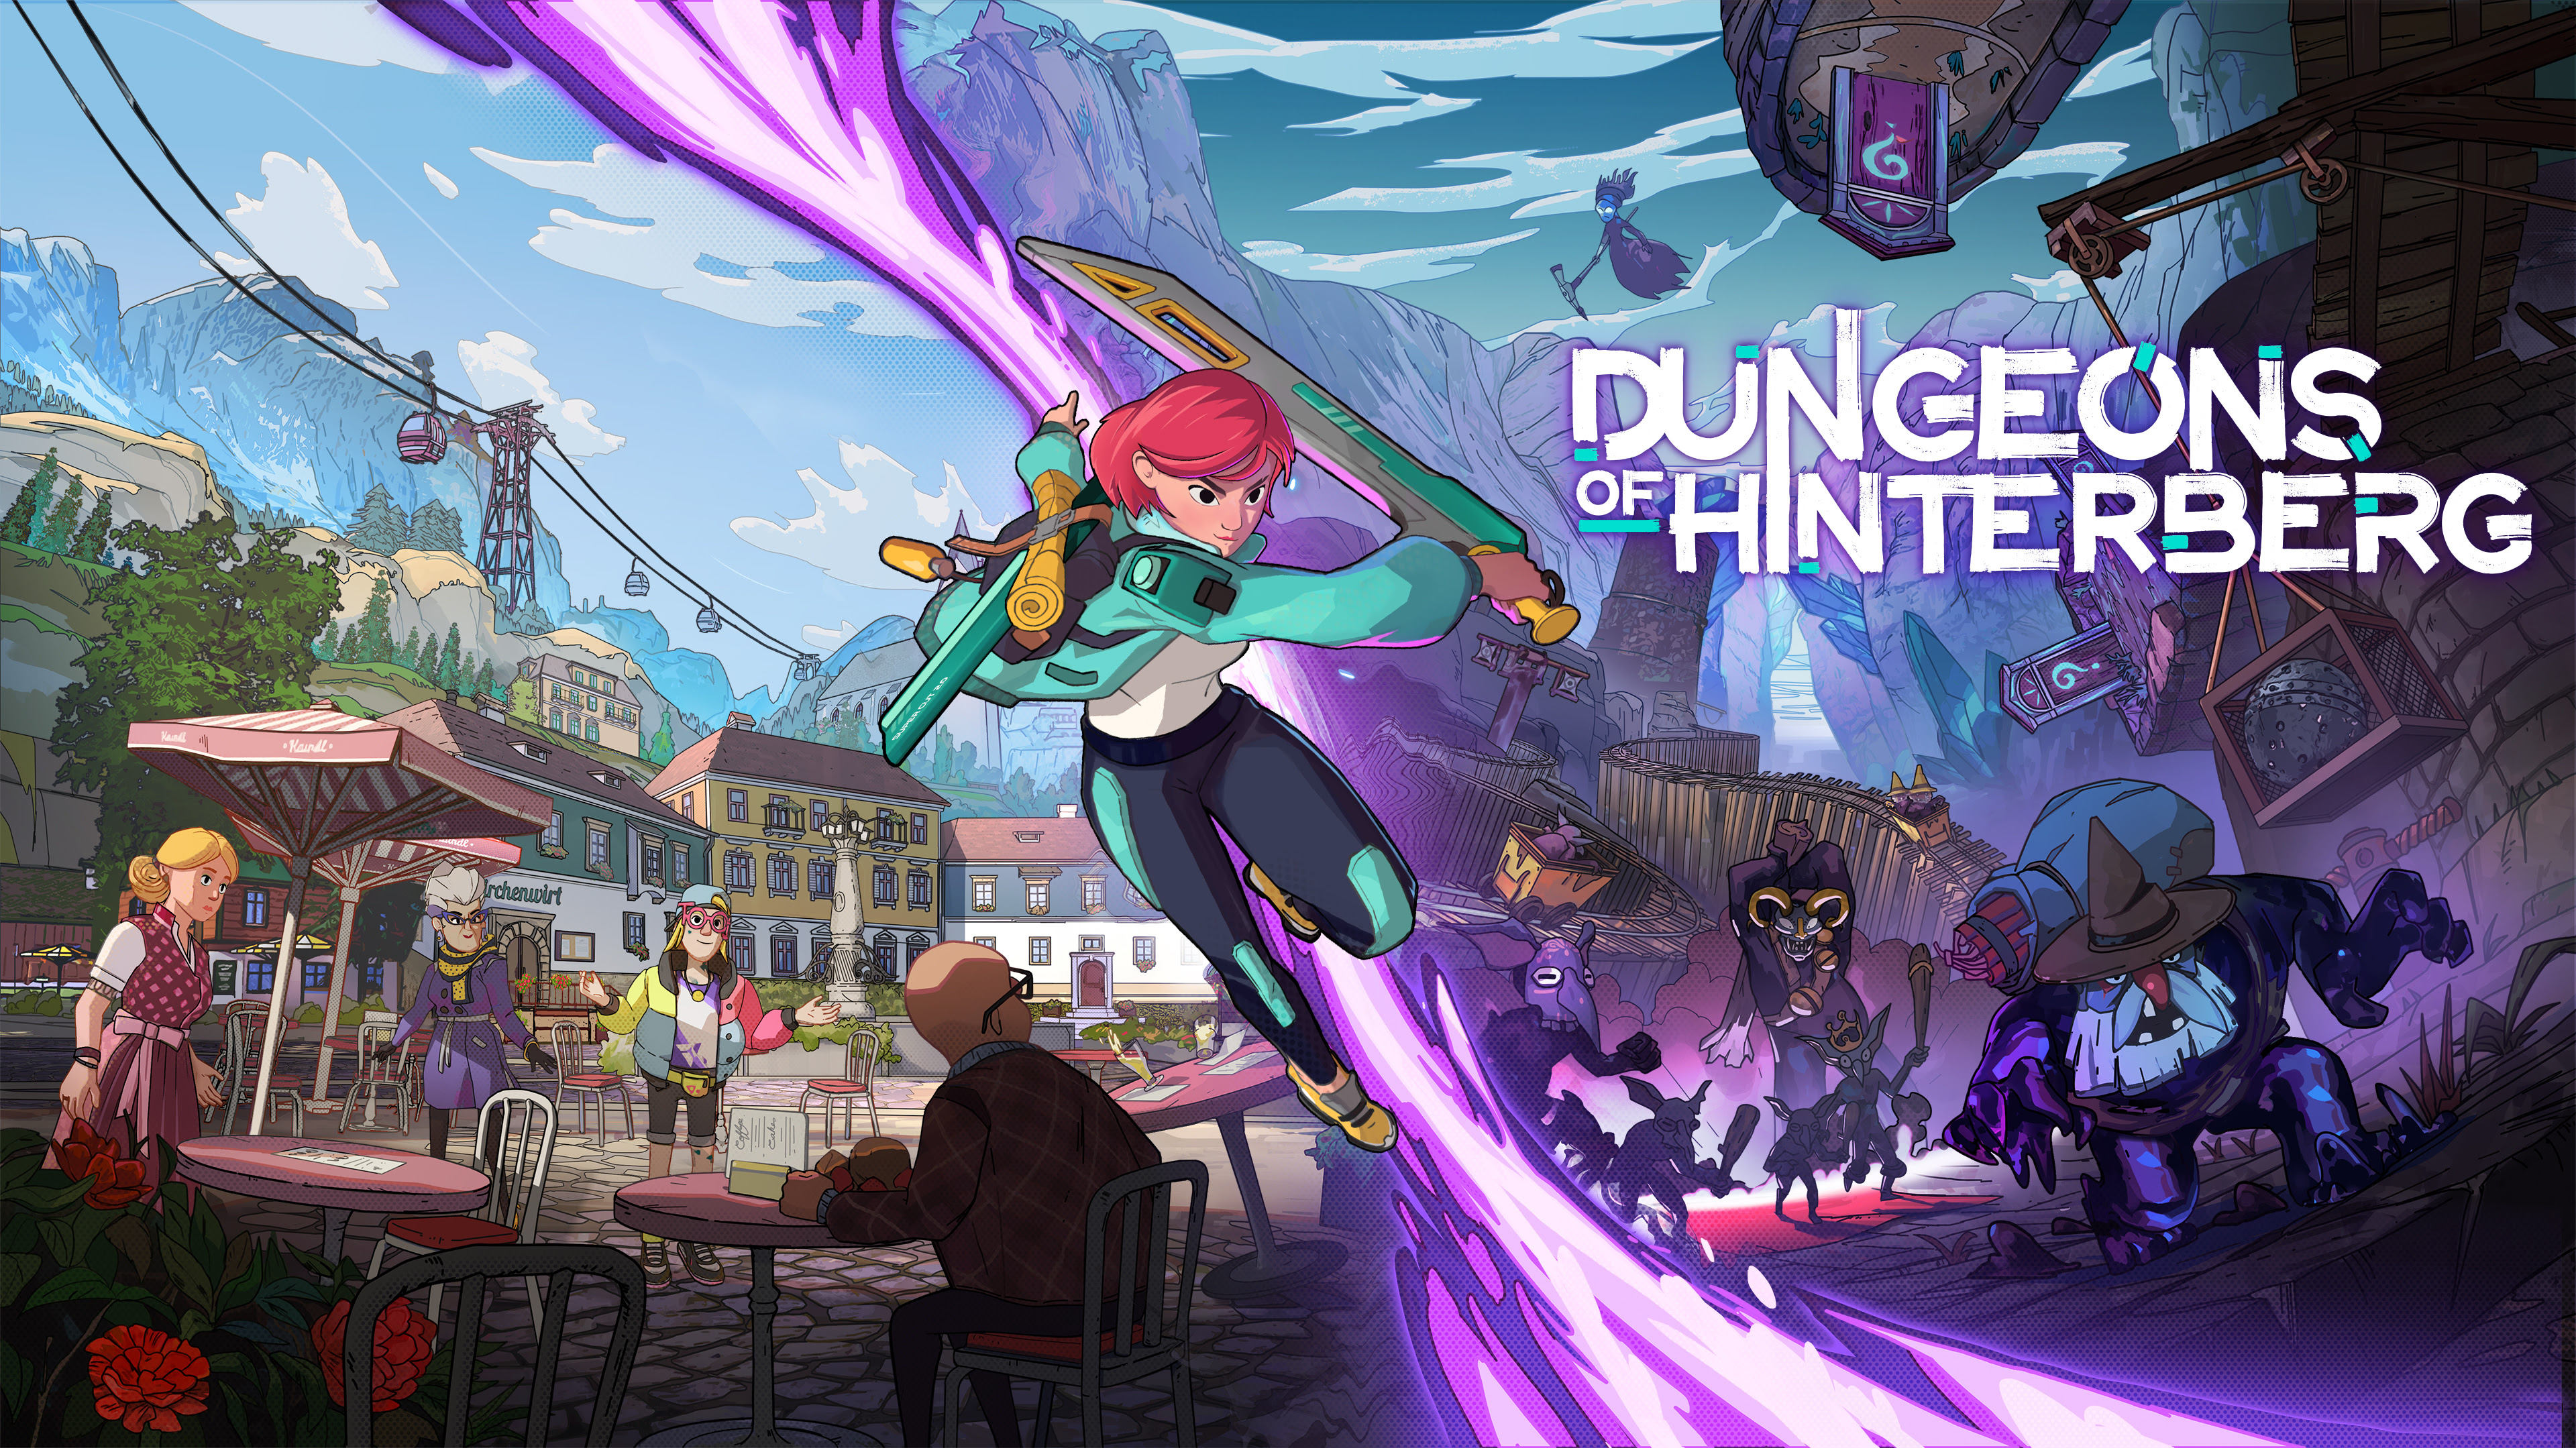 CURVE GAMES AND MICROBIRD UNVEIL DUNGEONS OF HINTERBERG